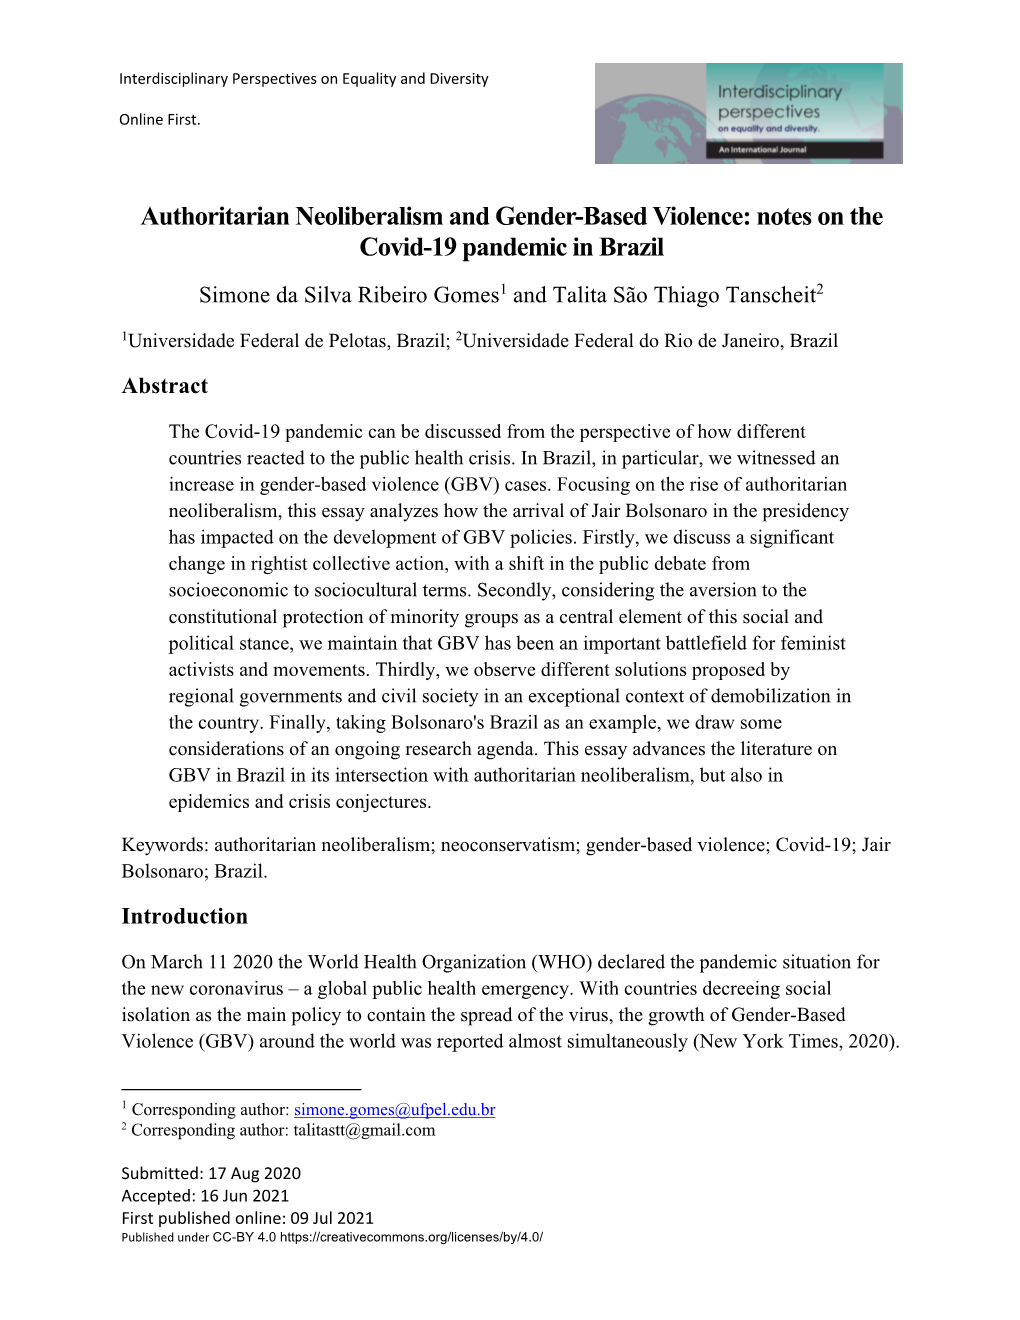 Authoritarian Neoliberalism and Gender-Based Violence: Notes on the Covid-19 Pandemic in Brazil Simone Da Silva Ribeiro Gomes1 and Talita São Thiago Tanscheit2